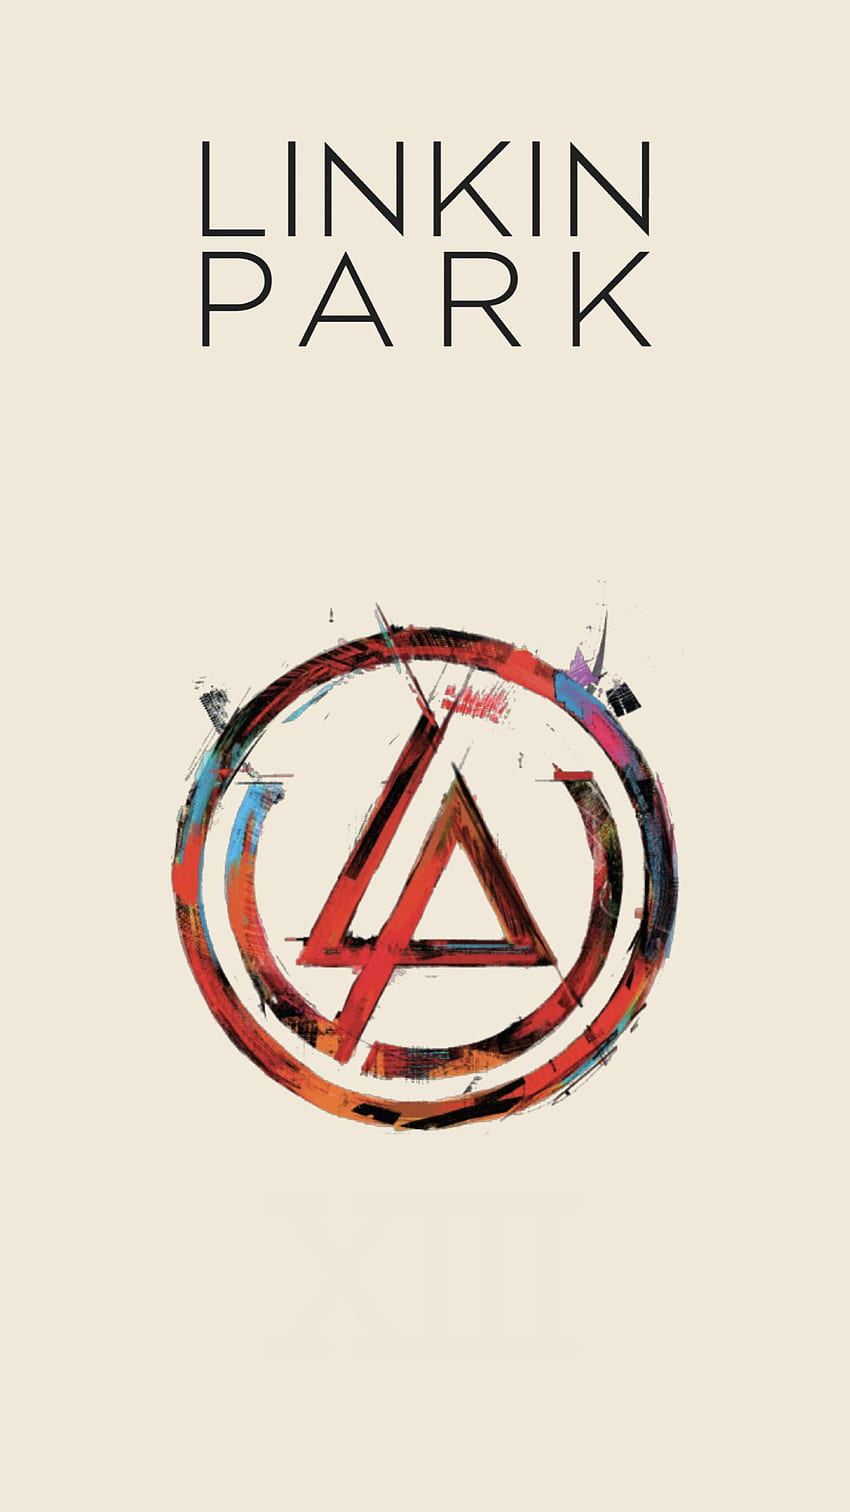 Discover more than 60 linkin park wallpaper best - in.cdgdbentre